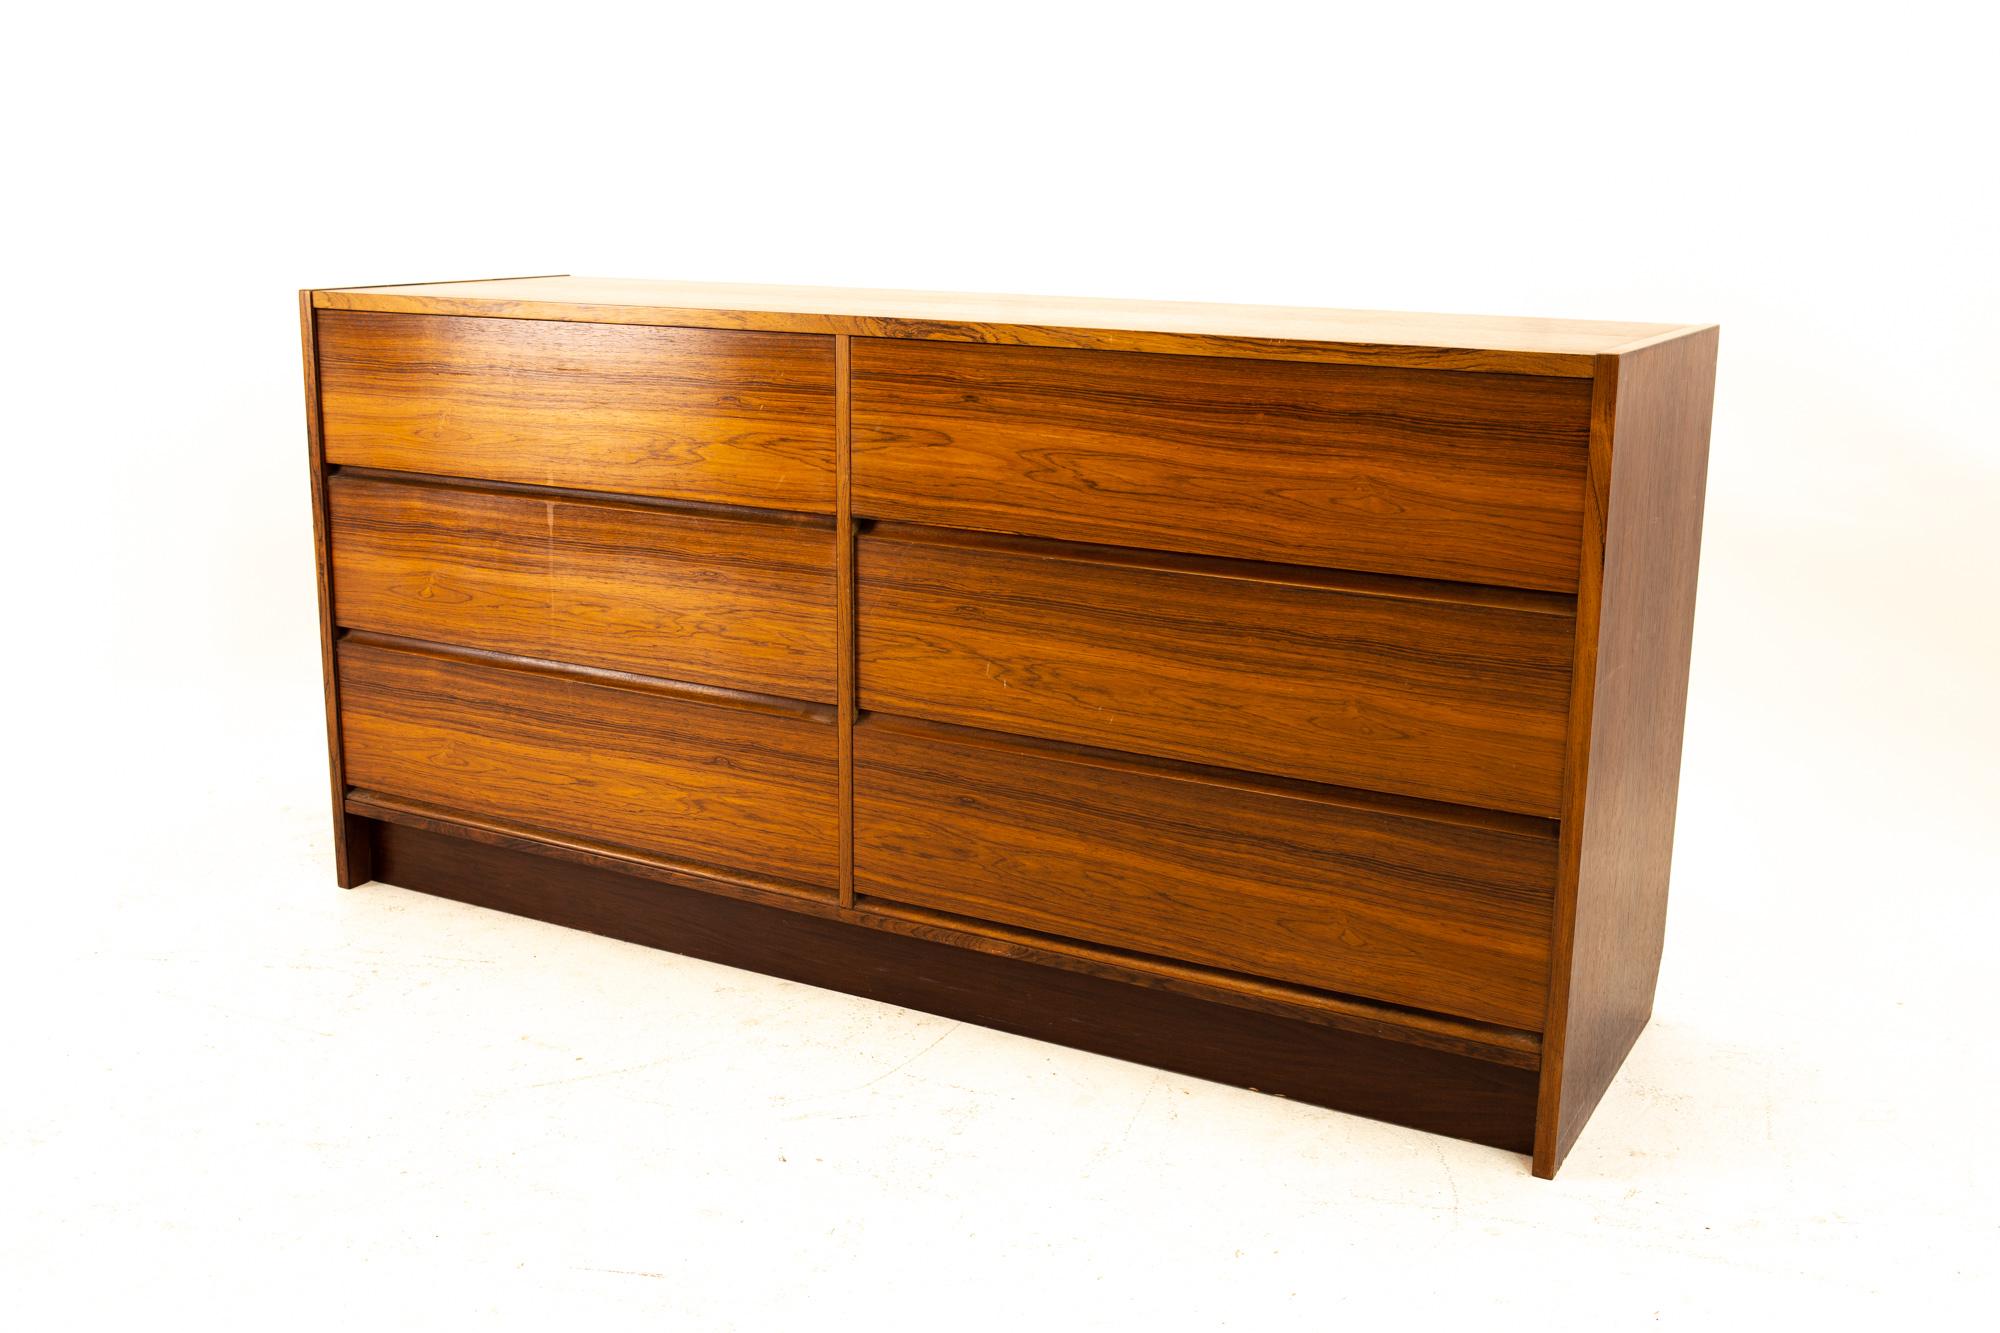 Danish Mid Century rosewood 6 drawer lowboy dresser
Dresser measures: 59.75 wide x 18.25 deep x 29.25 high

All pieces of furniture can be had in what we call restored vintage condition. That means the piece is restored upon purchase so it’s free